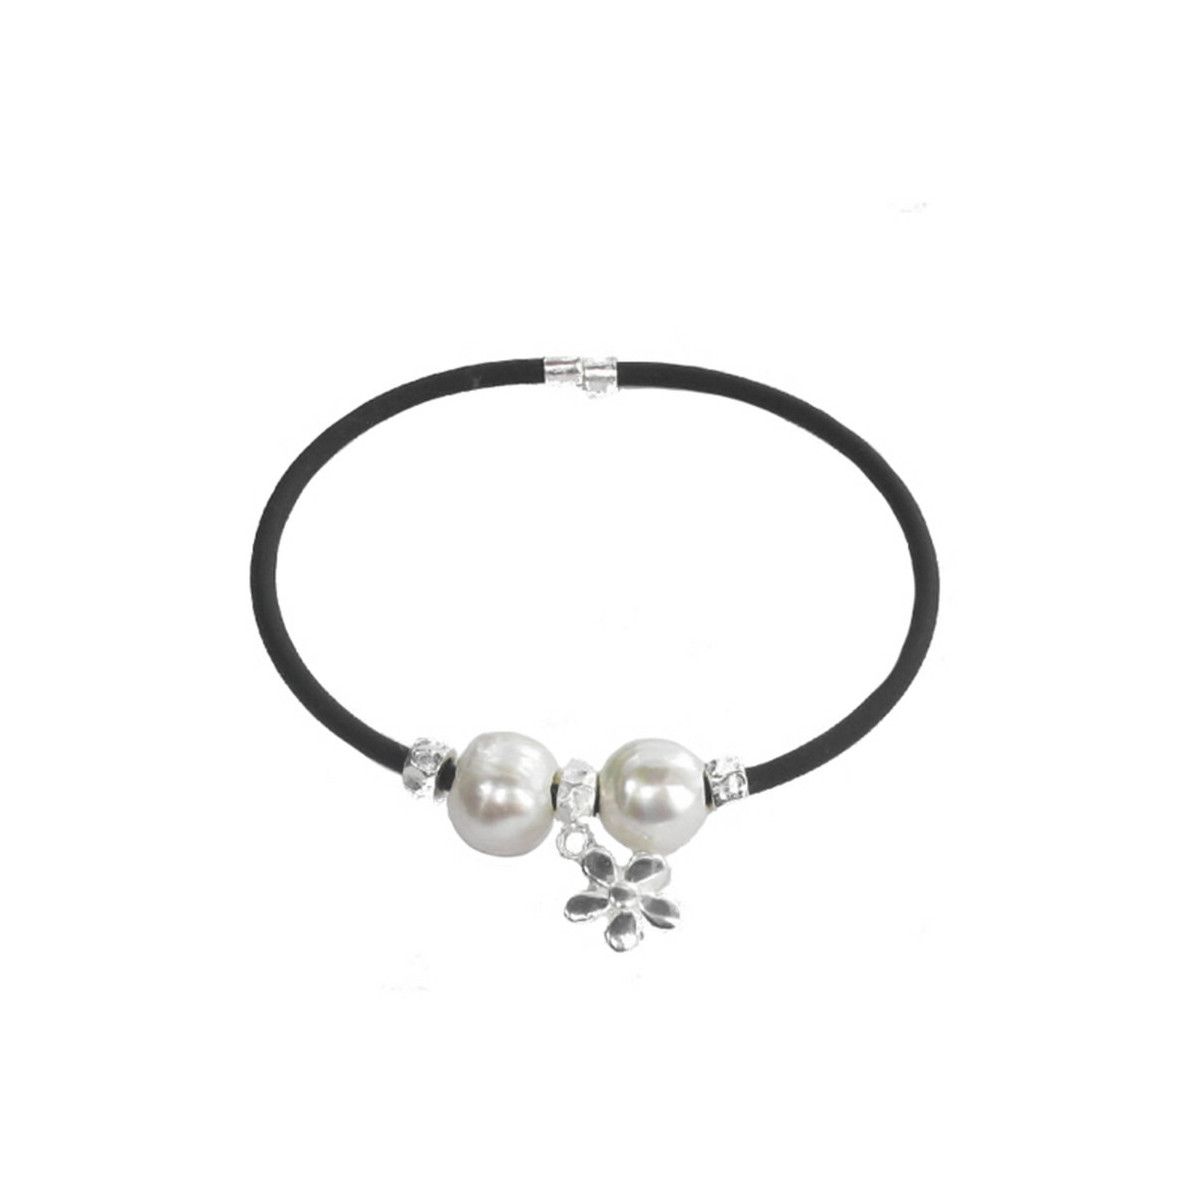 RUBBER BRACELET WITH SILVER AND PEARLS